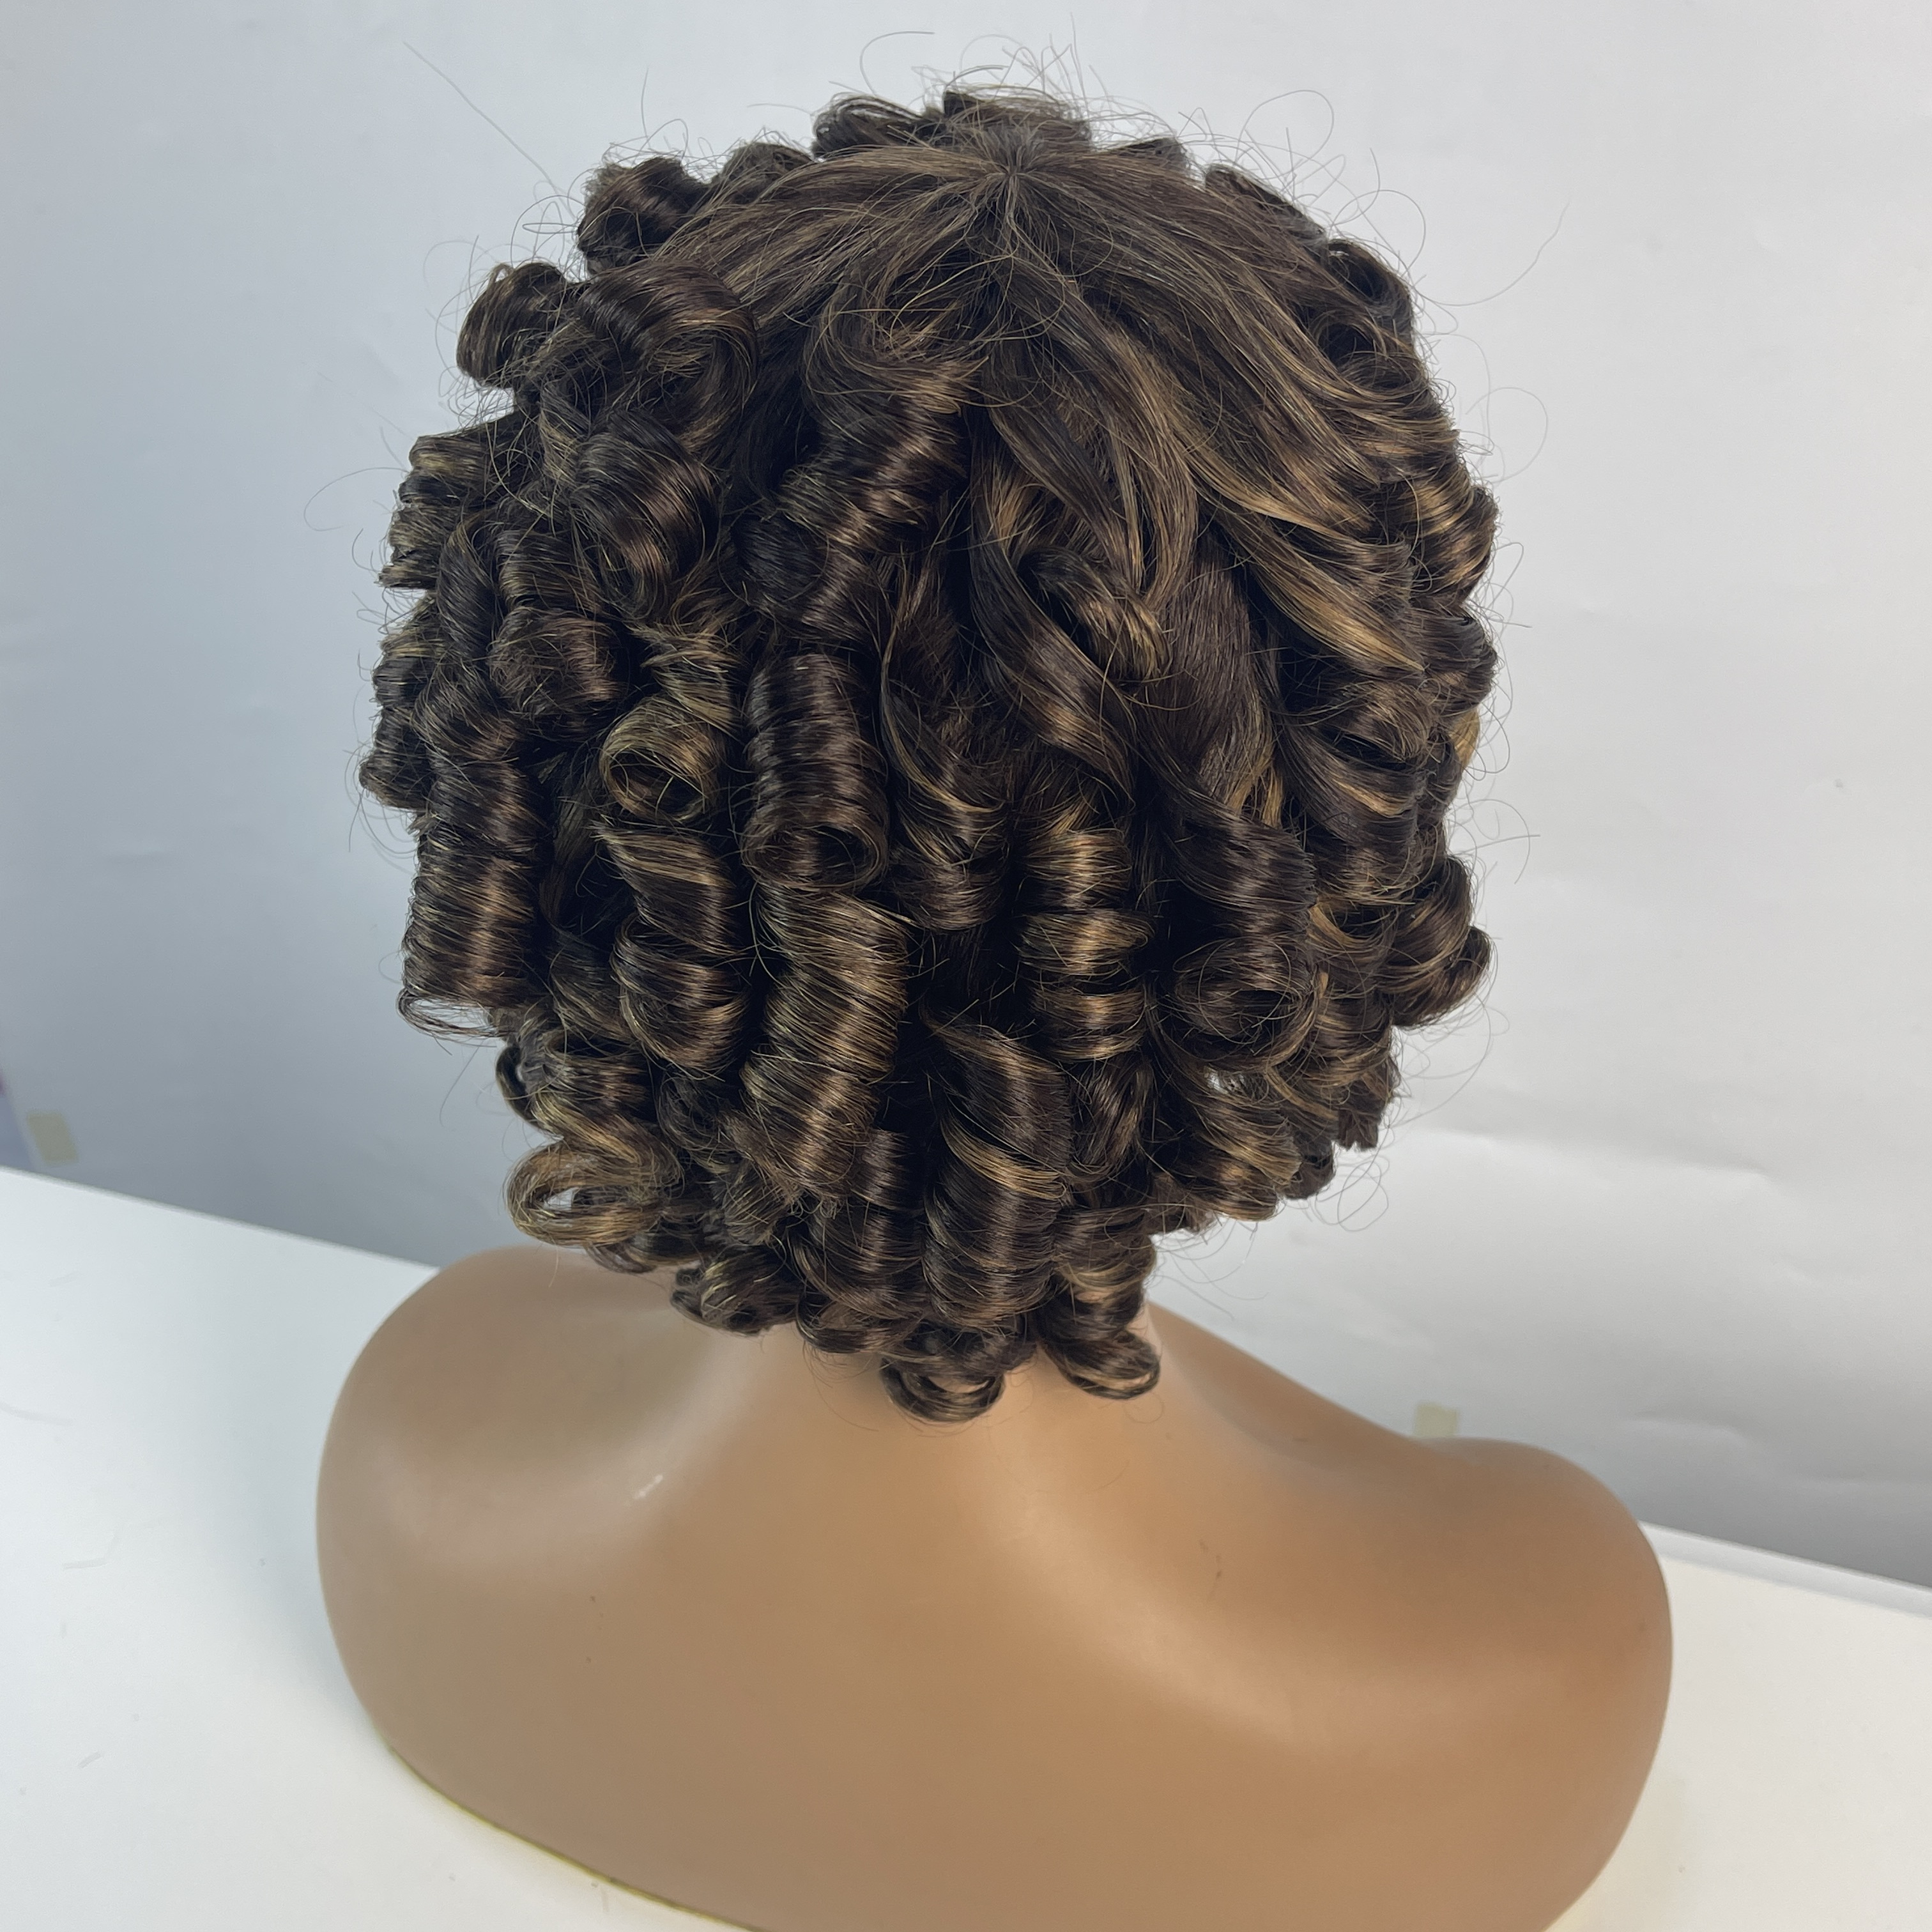 Short Afro Curly Human Hair Wig with Bangs Brazilian Virgin Short Curly Human Hair Wigs for Black Women